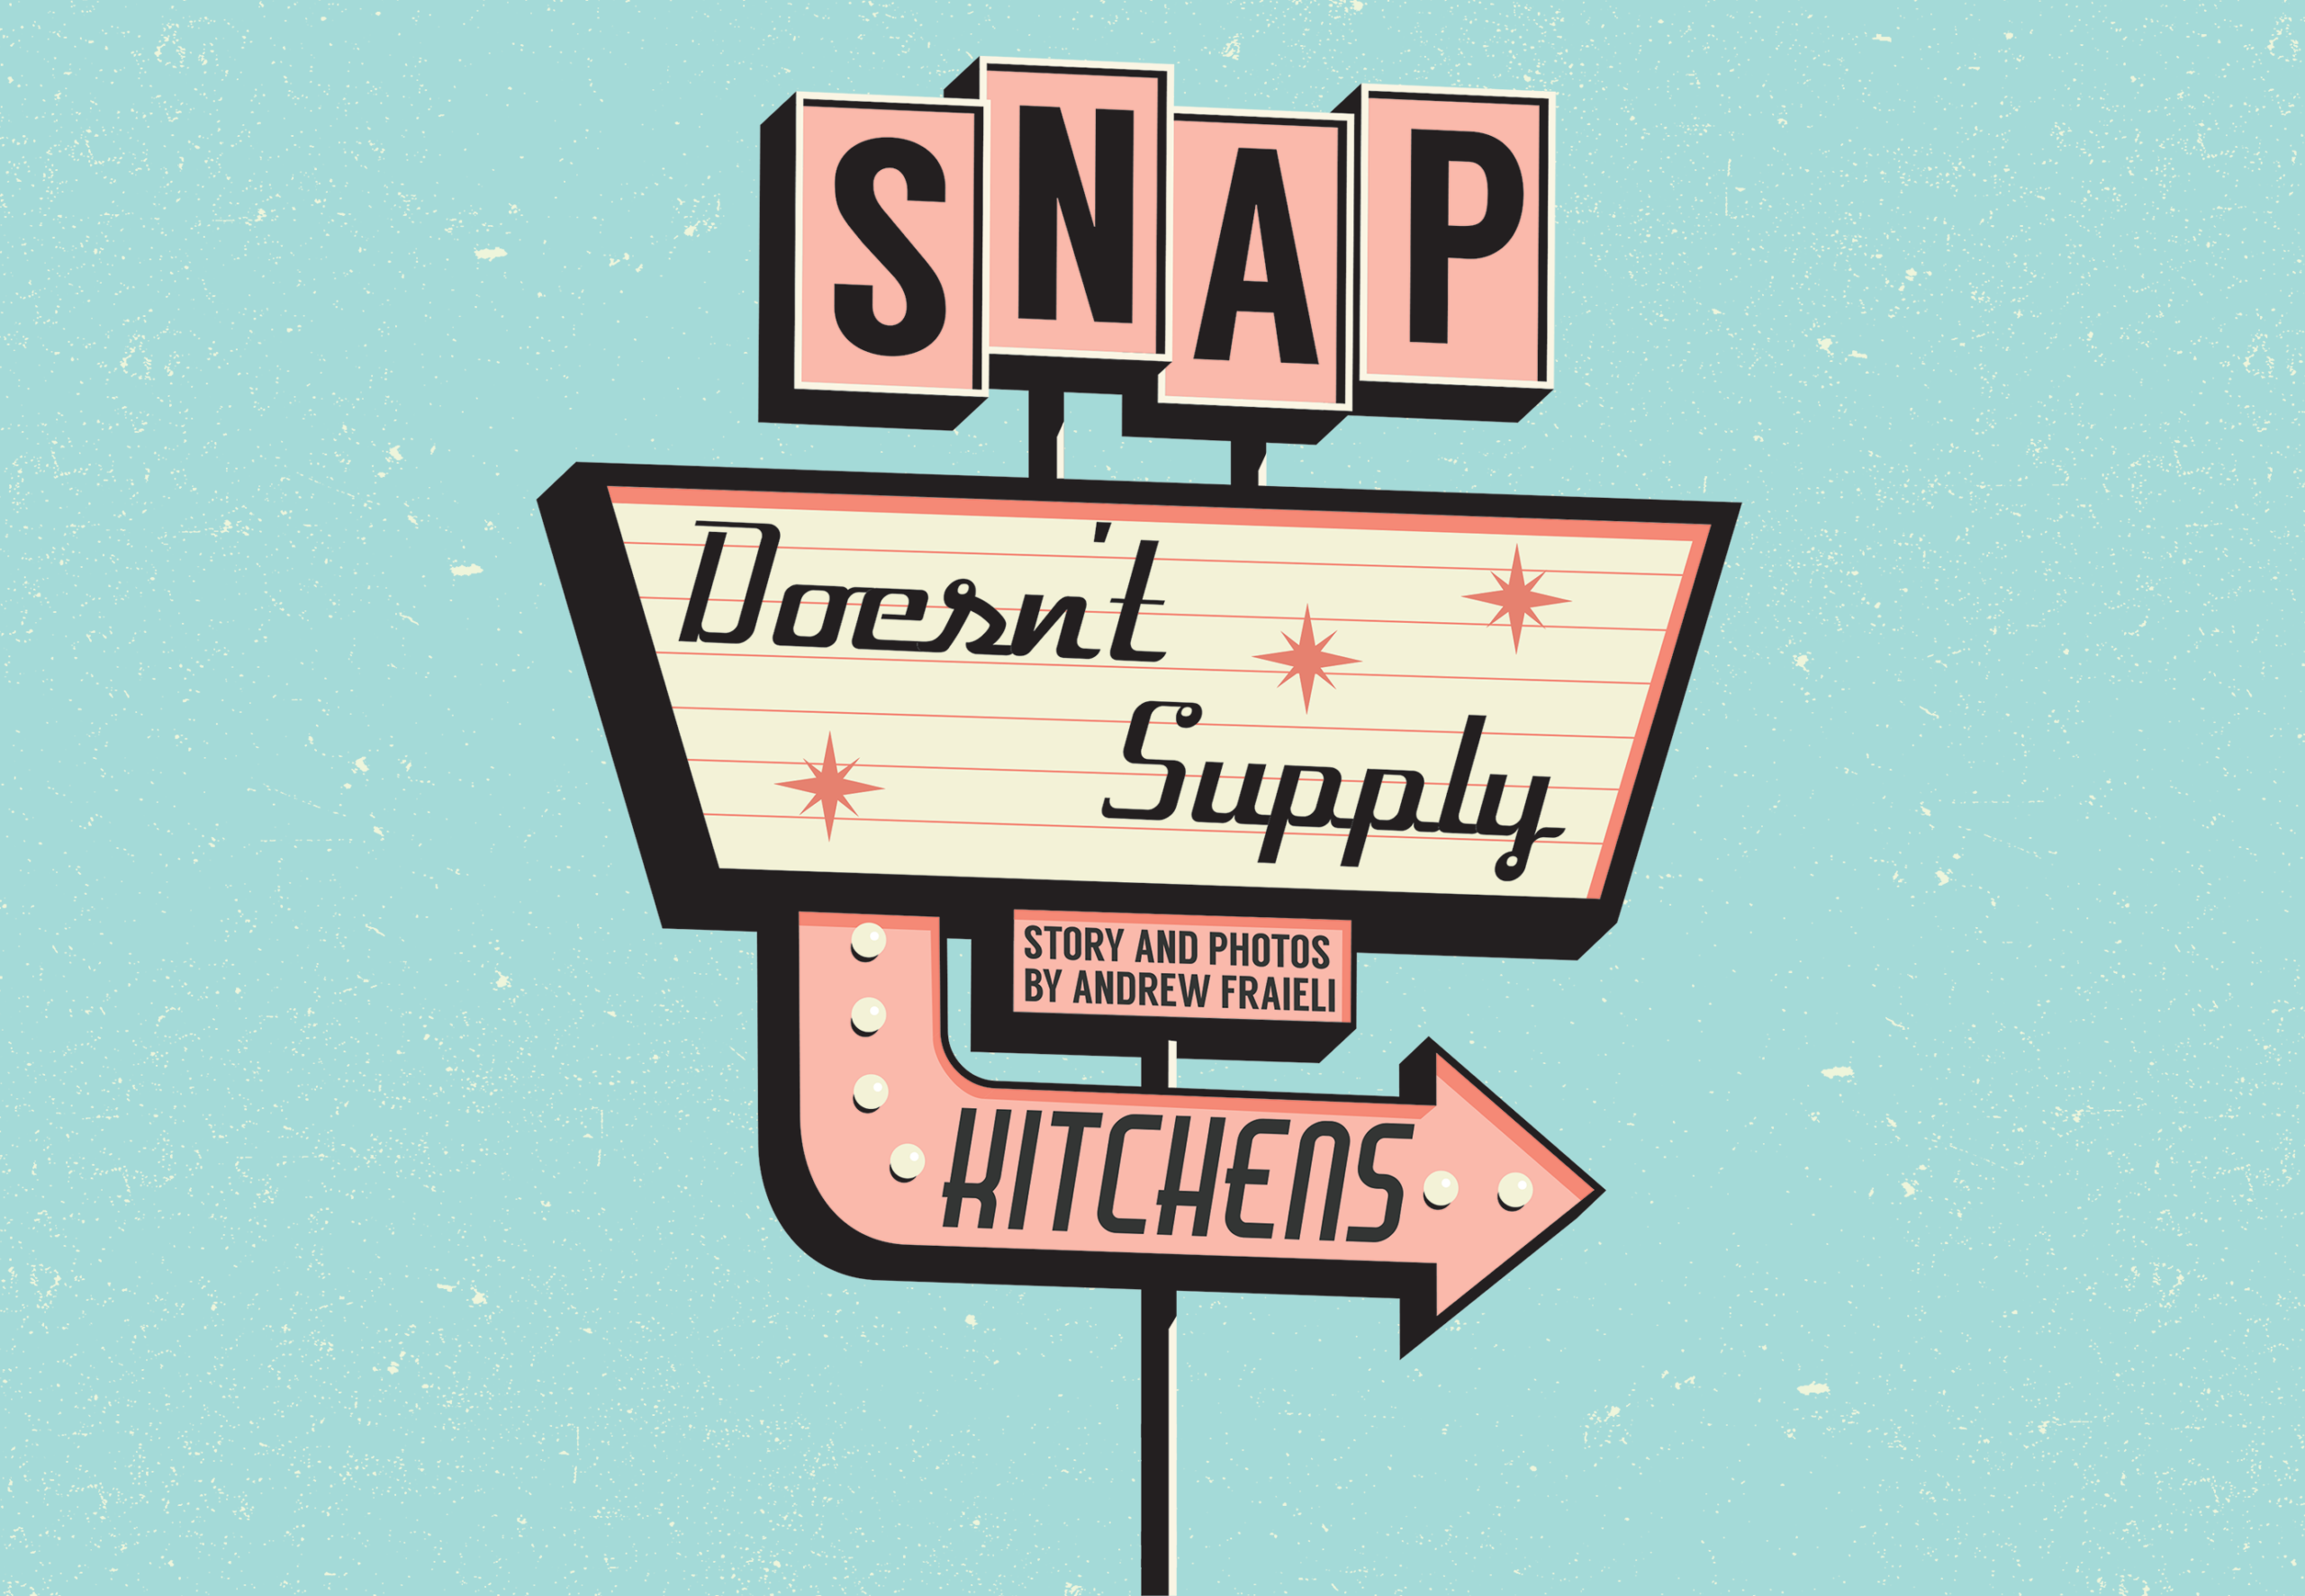 SNAP Doesn’t Supply Kitchens